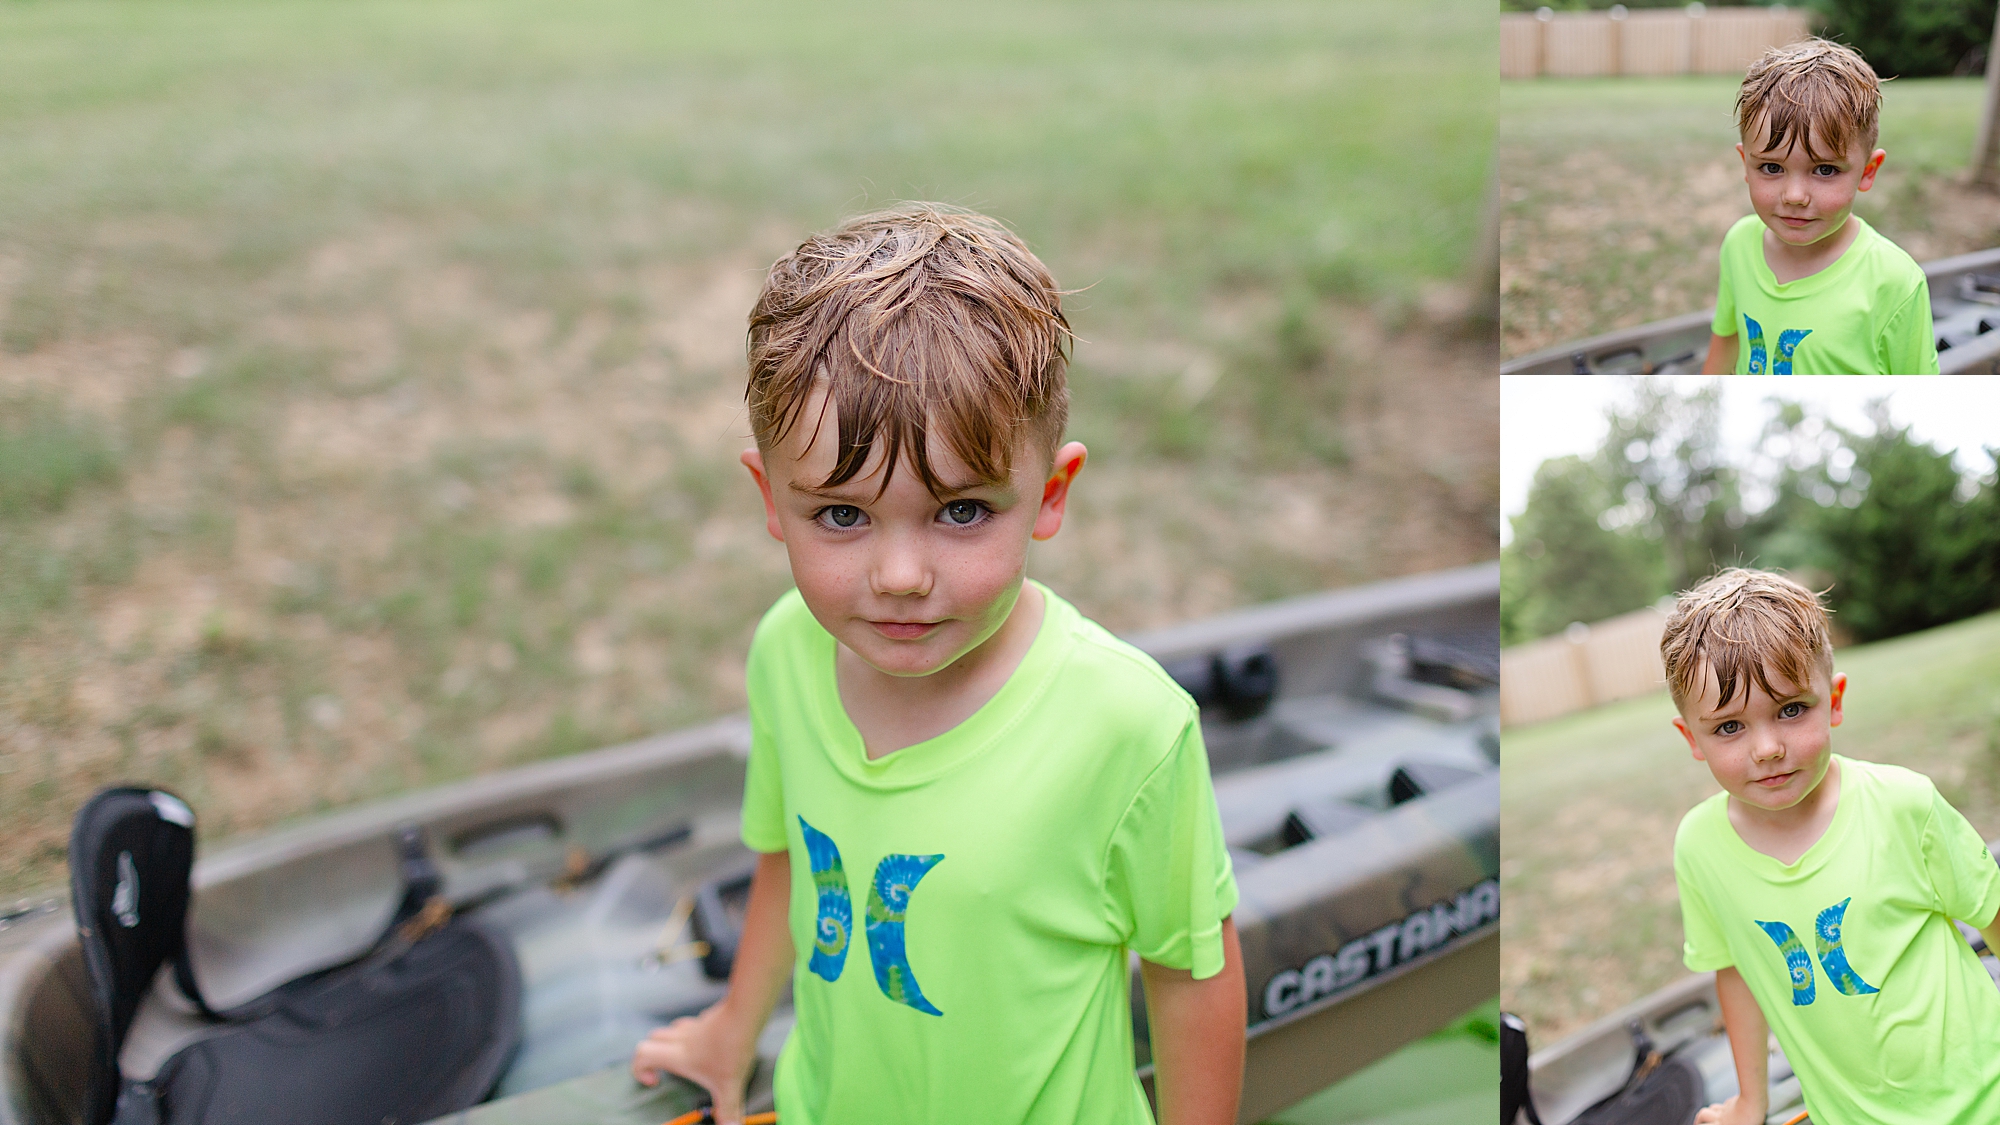 Four year old male portrait next to a canoe